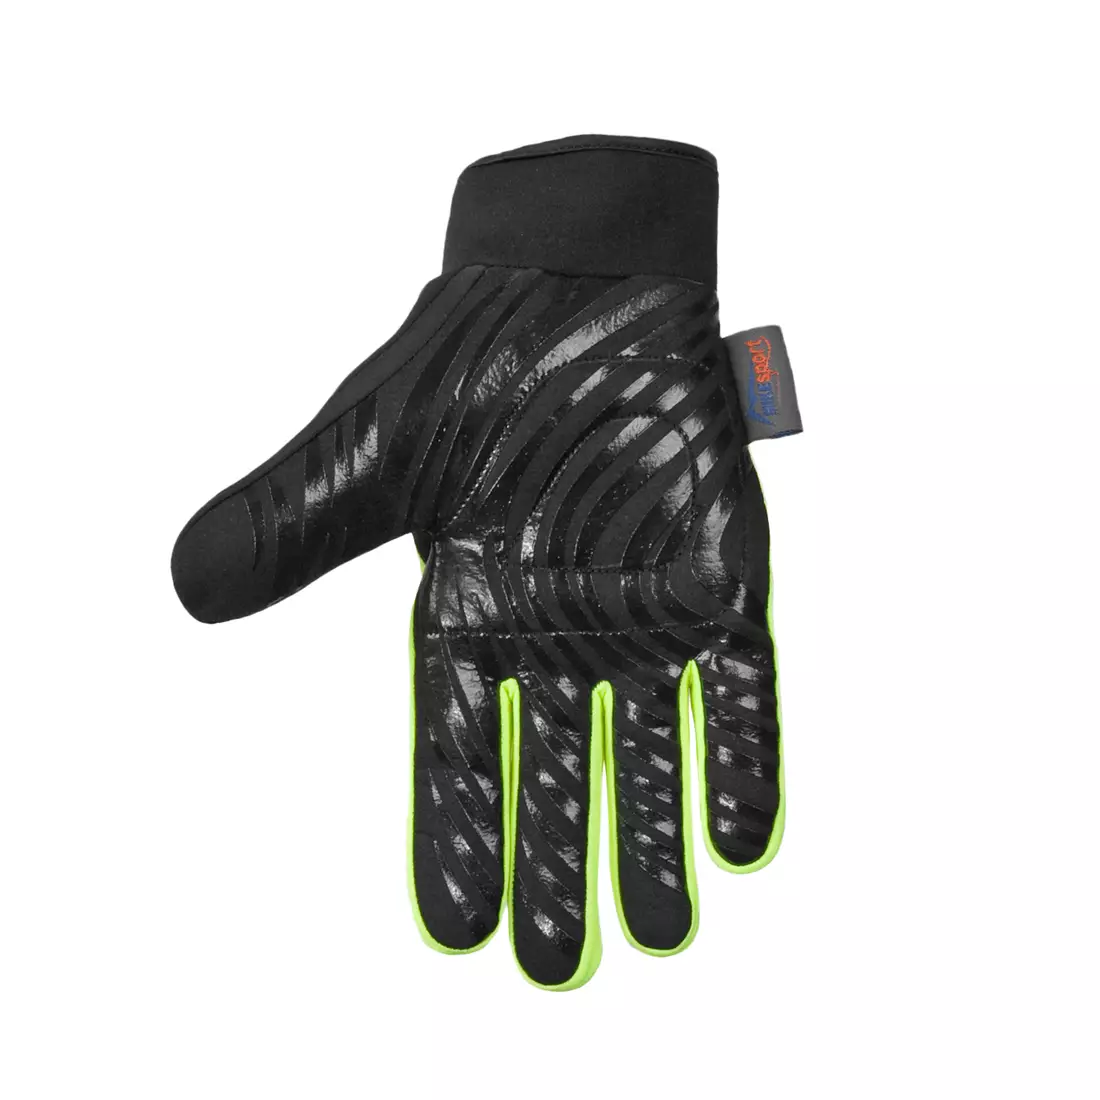 MikeSPORT 2014-W 1902 winter cycling gloves, color: fluorine